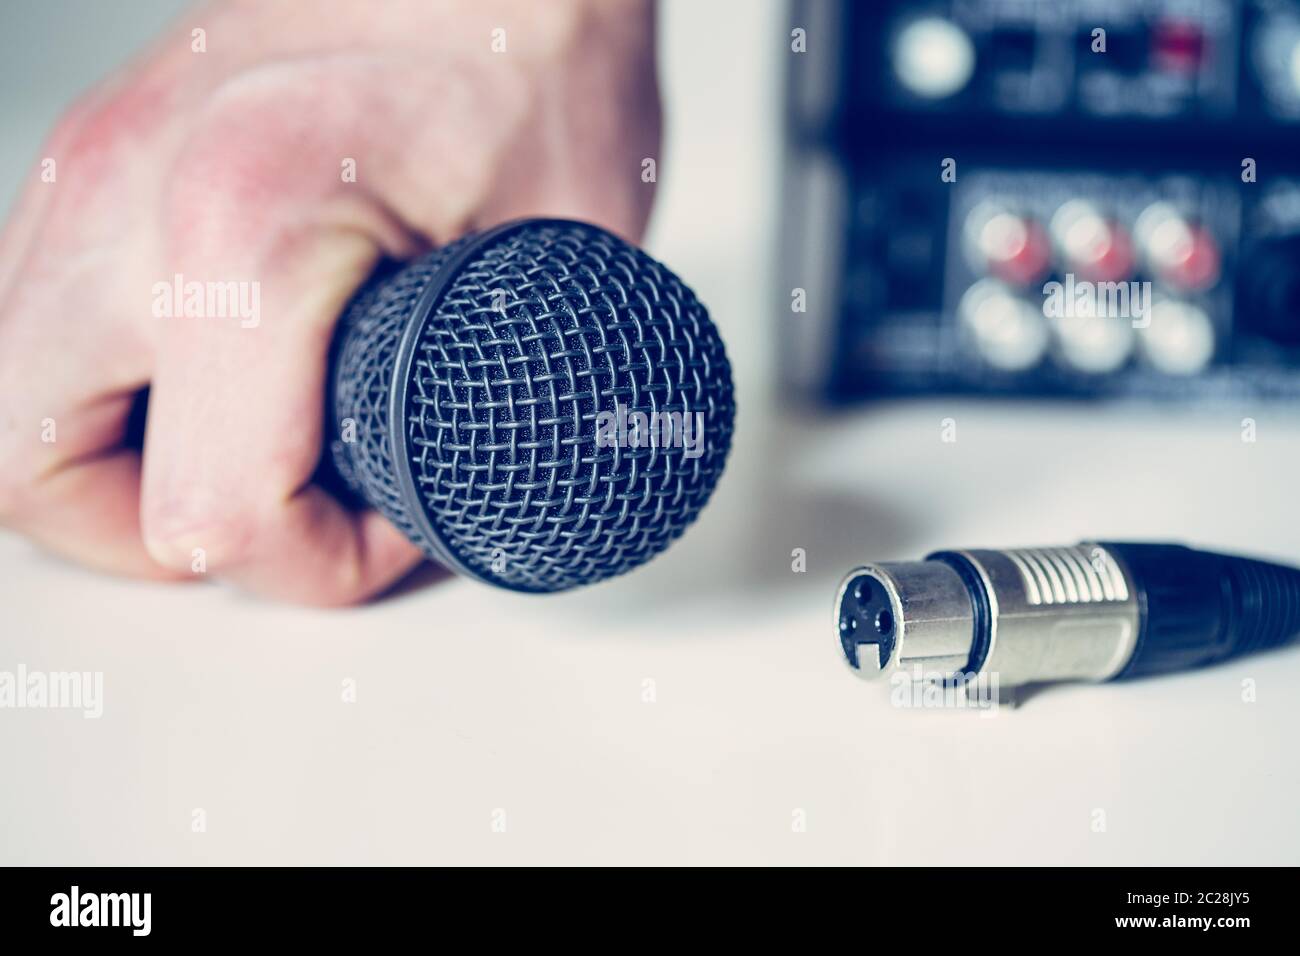 Black microphone holding in hand, and audio cable, mixer in the blurry background Stock Photo